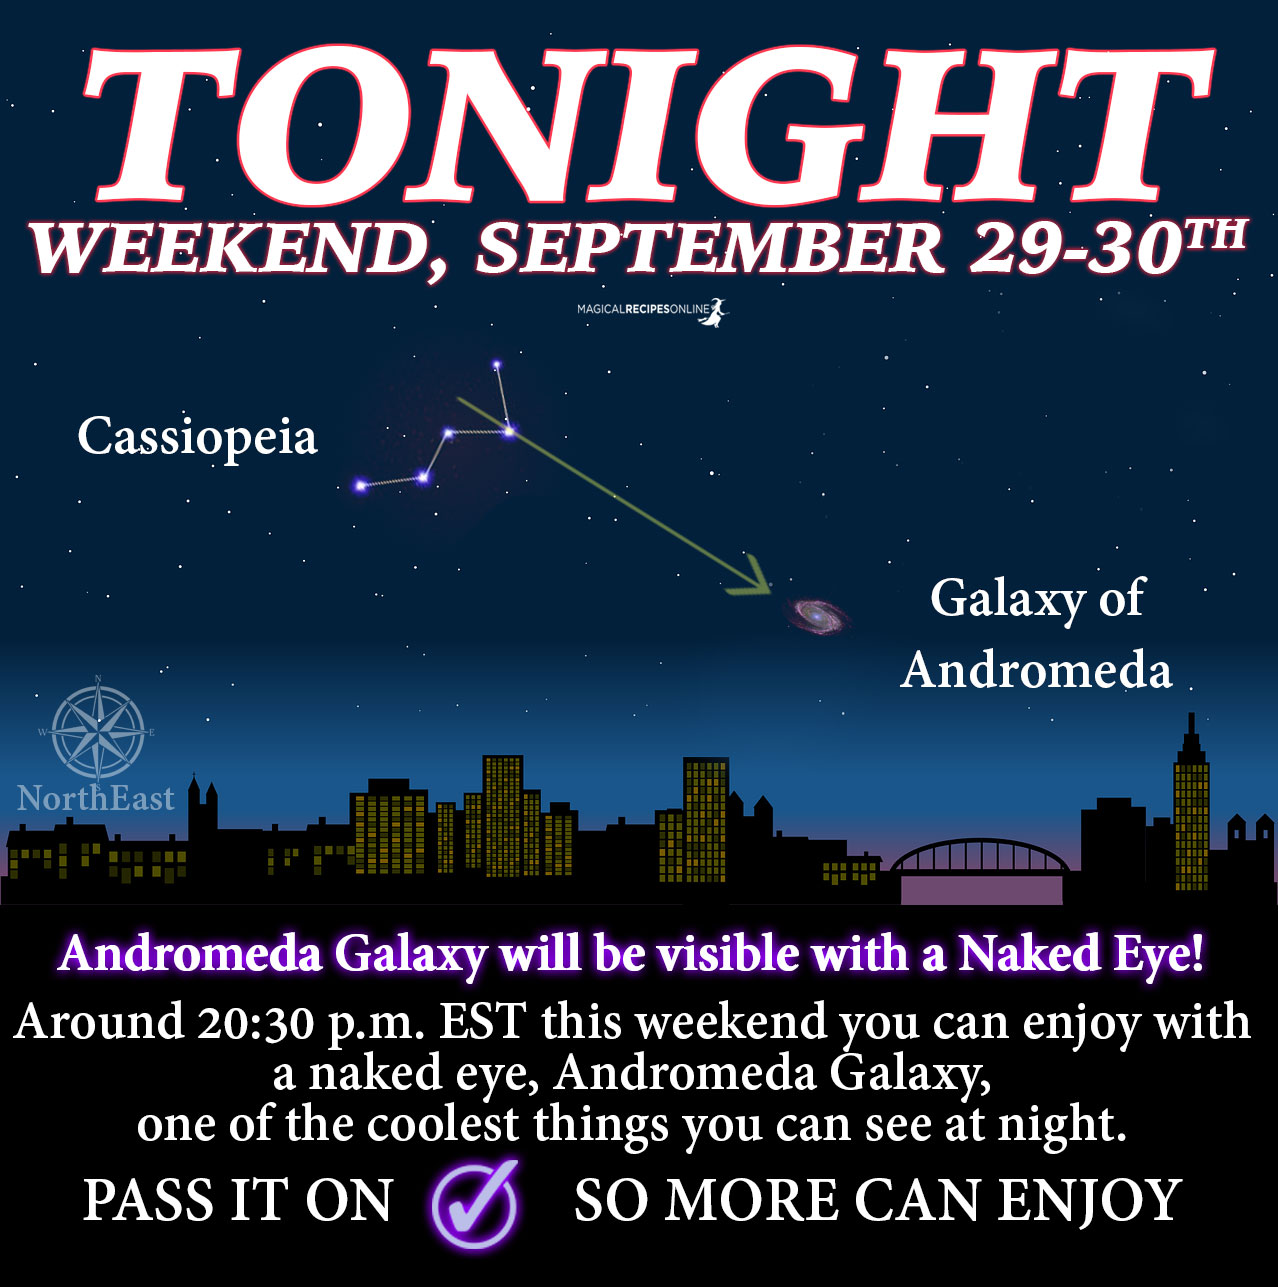 How to Locate Andromeda by locating Cassiopeia